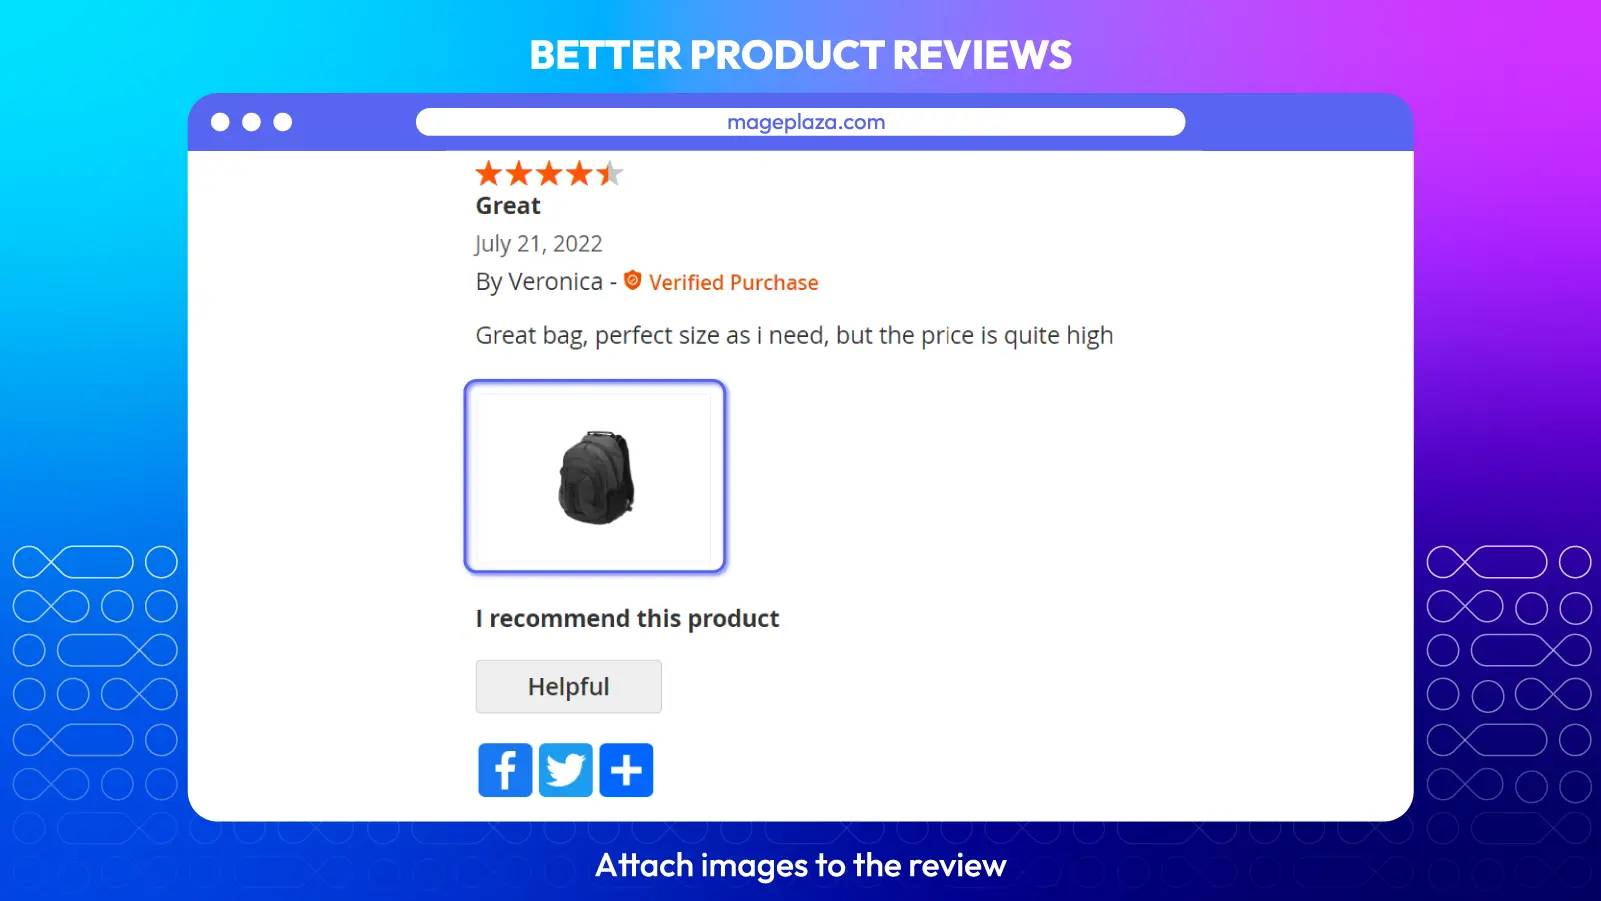 https://cdn2.mageplaza.com/mp/assets/img/extensions-new/better-product-reviews/S2.webp